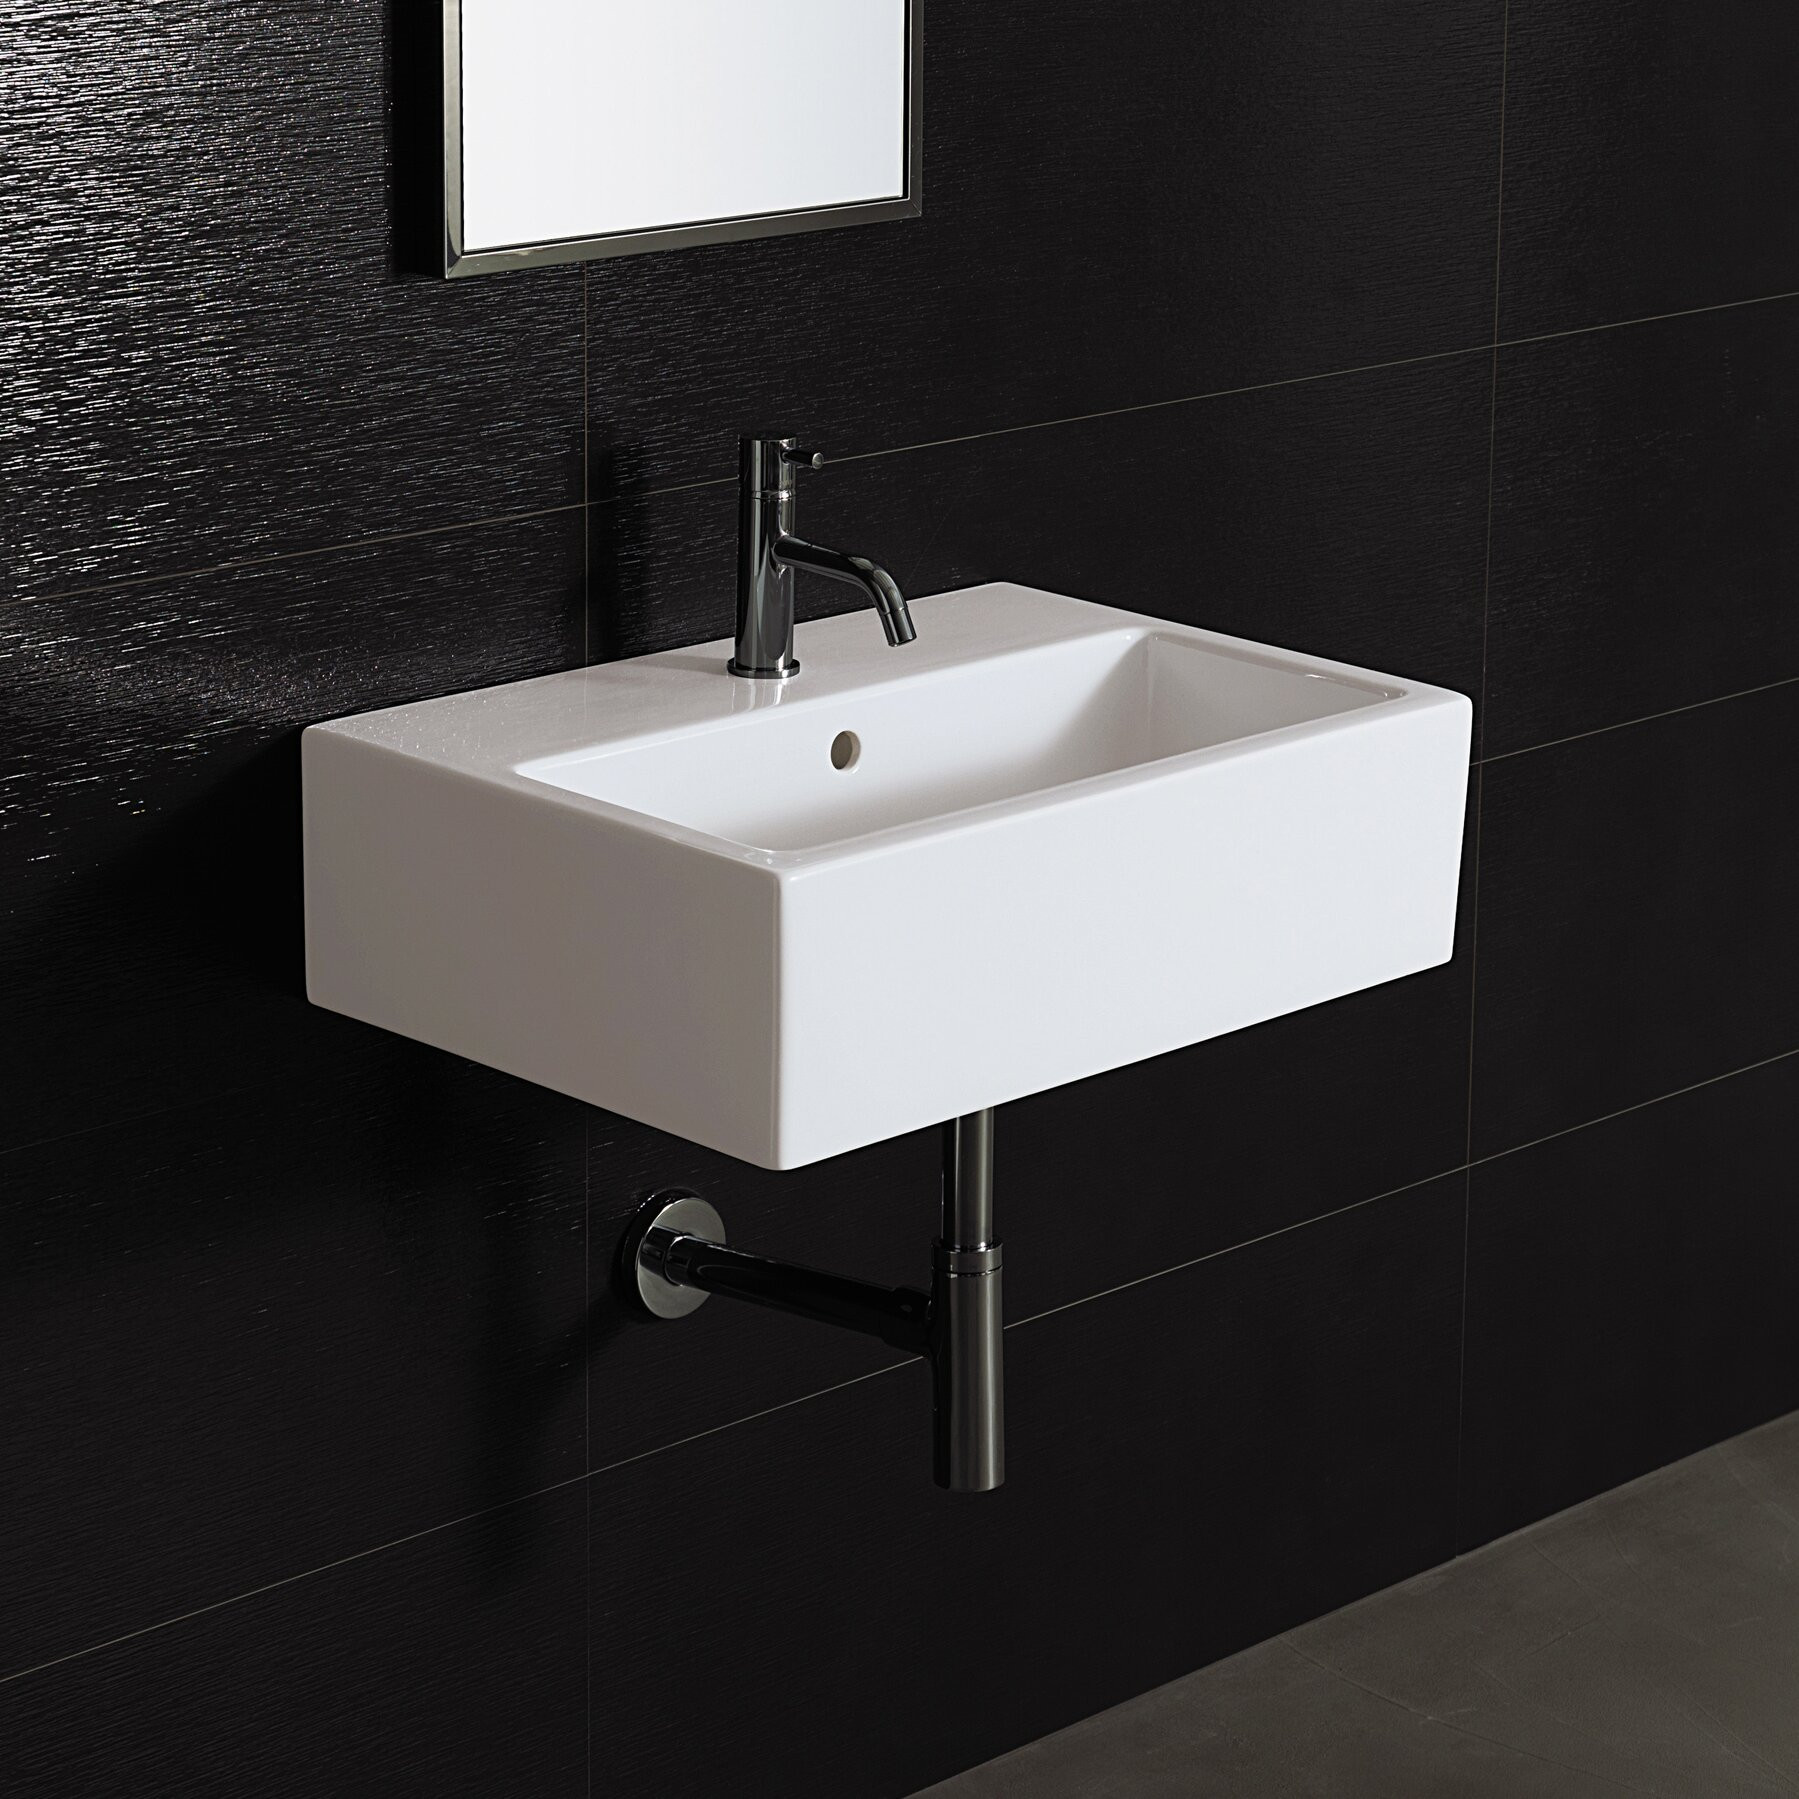 Wall Mounted Bathroom Sink
 Bissonnet Area Boutique Wall Mount Bathroom Sink & Reviews